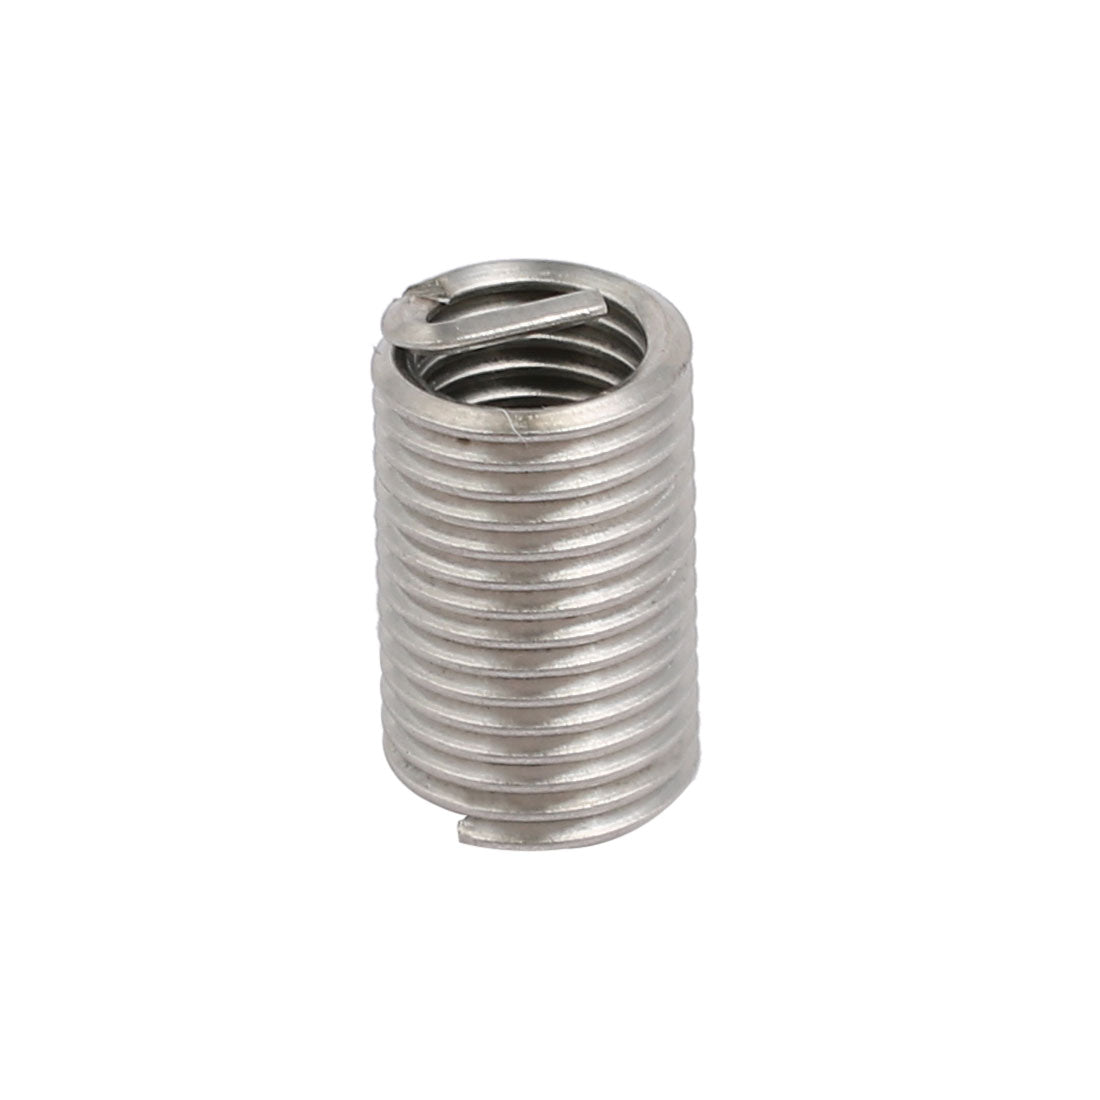 uxcell Uxcell M6x1mmx18mm 304 Stainless Steel Helical Coil Wire Thread Insert 12pcs